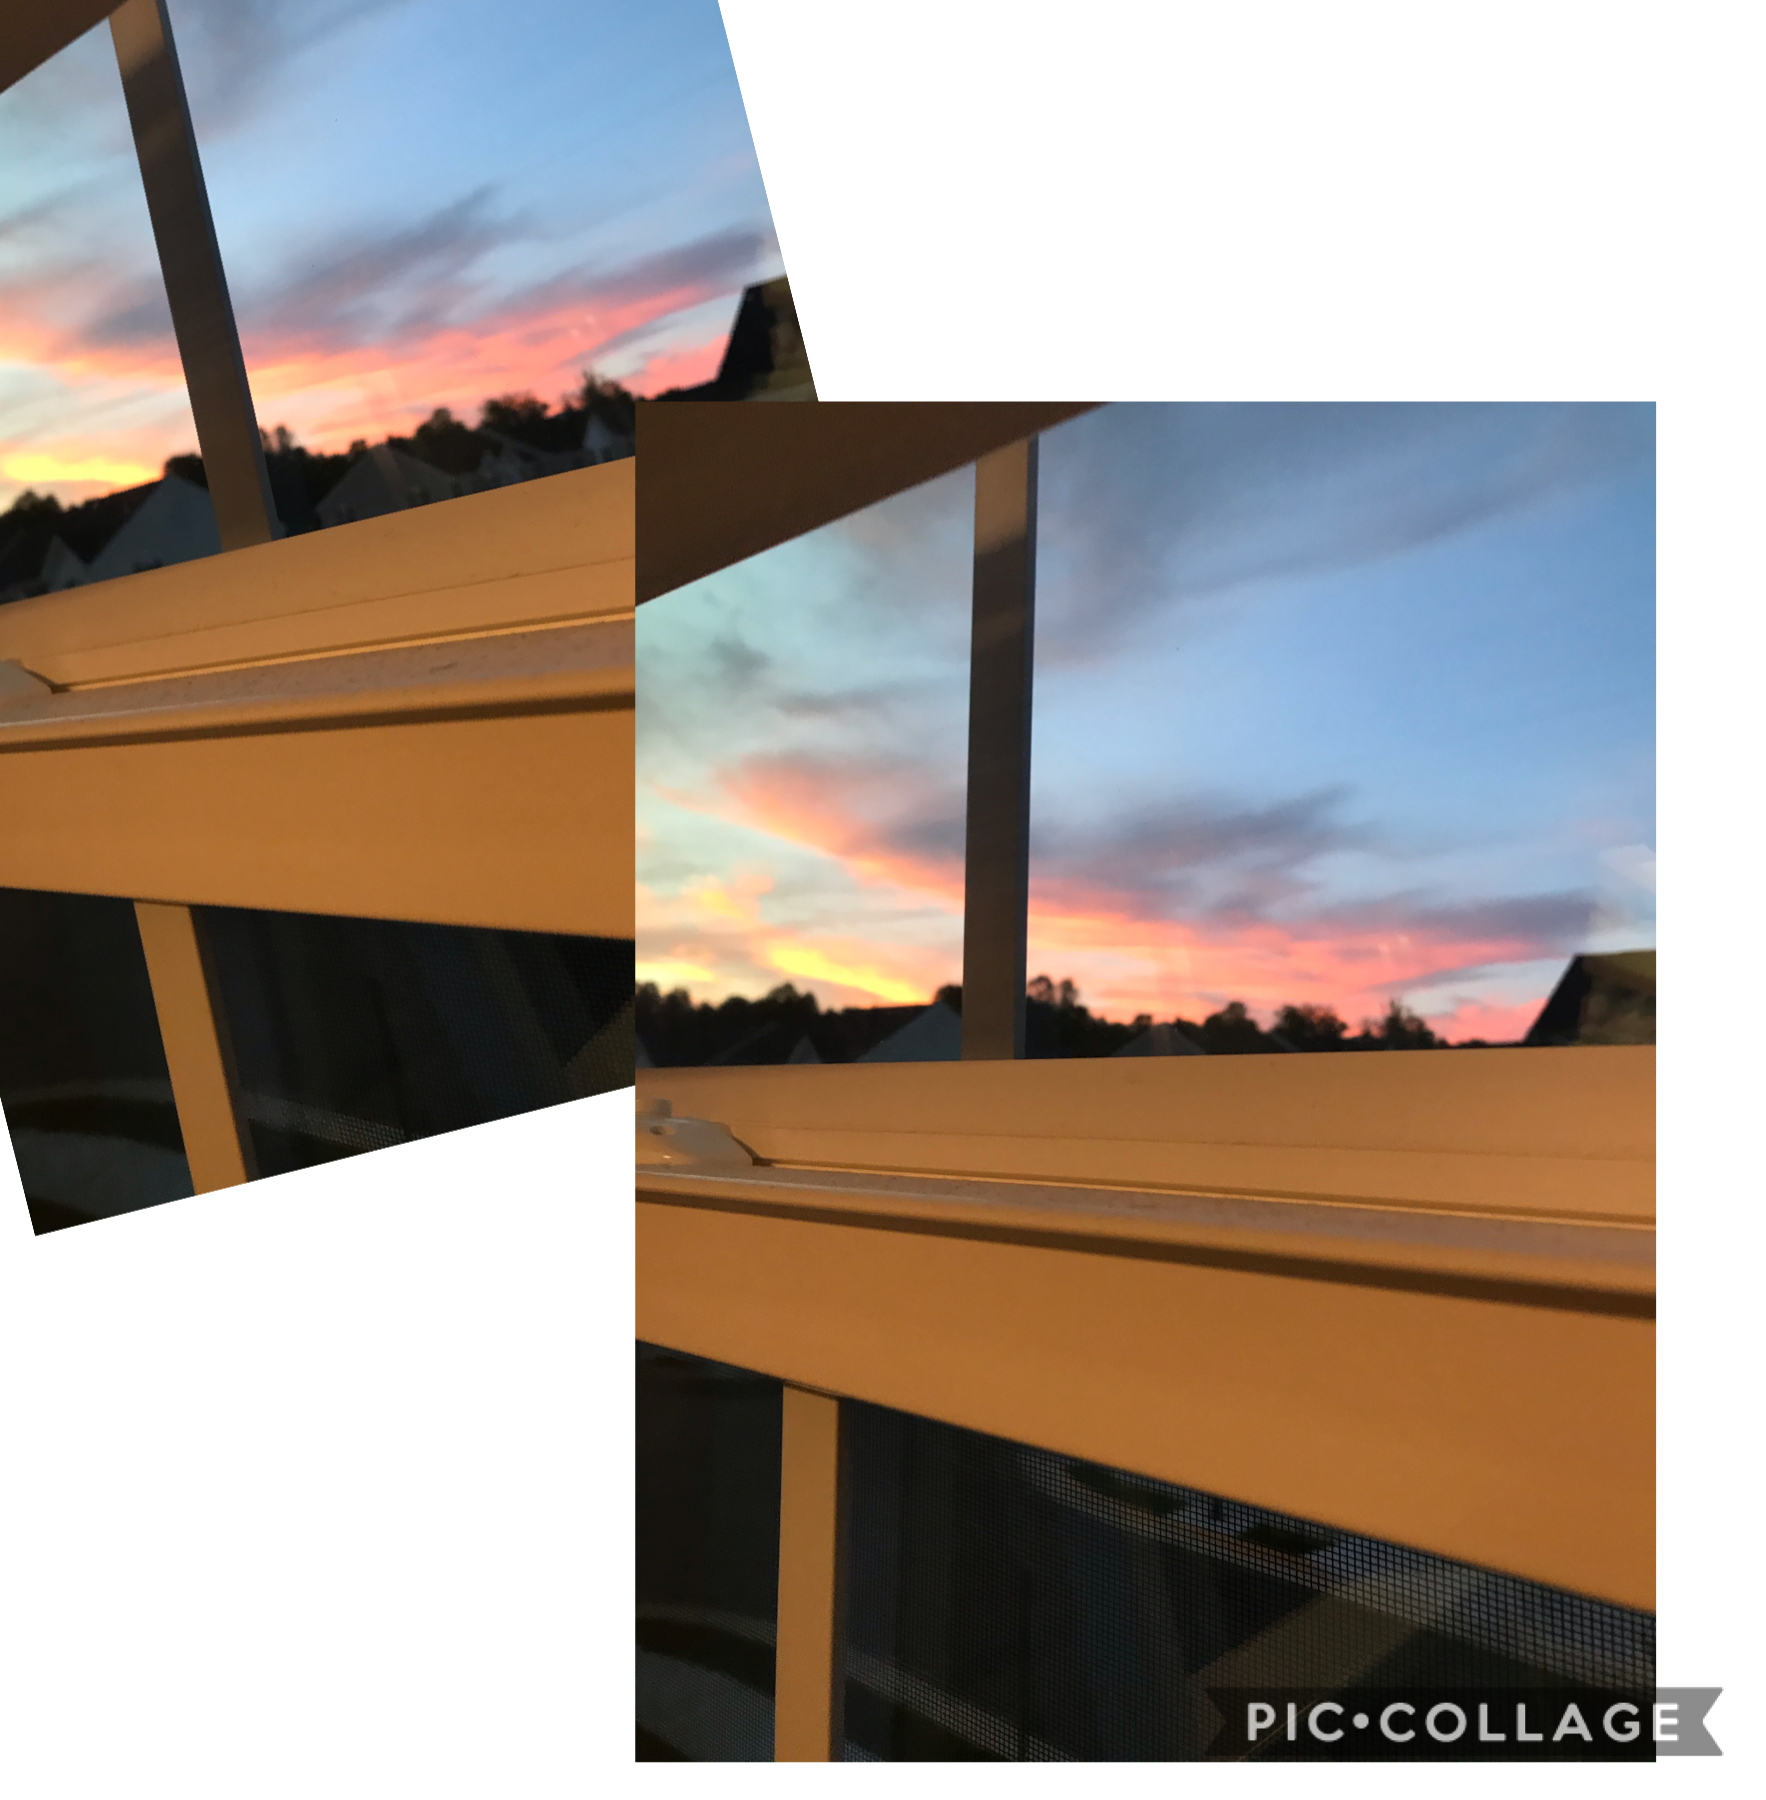 Pictures of sunset 